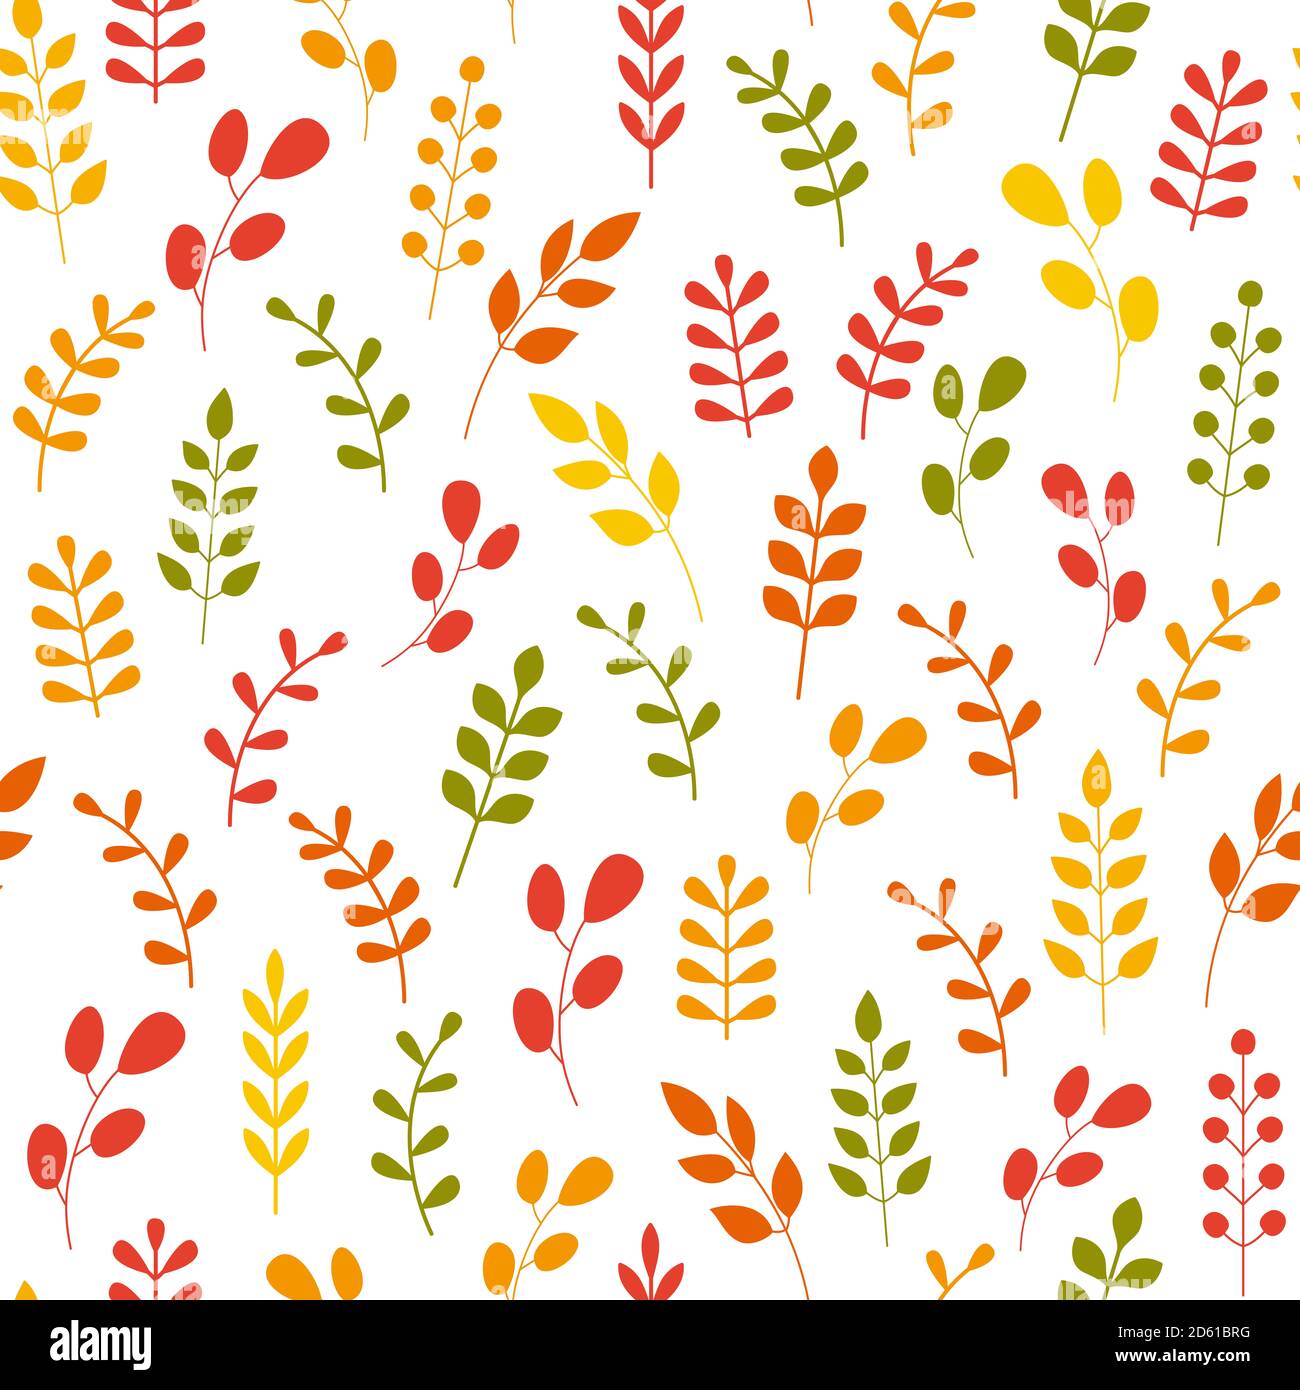 Autumn seamless pattern with leaf. It can be used for wallpapers, cards, wrapping, patterns for clothes and other. Stock Photo